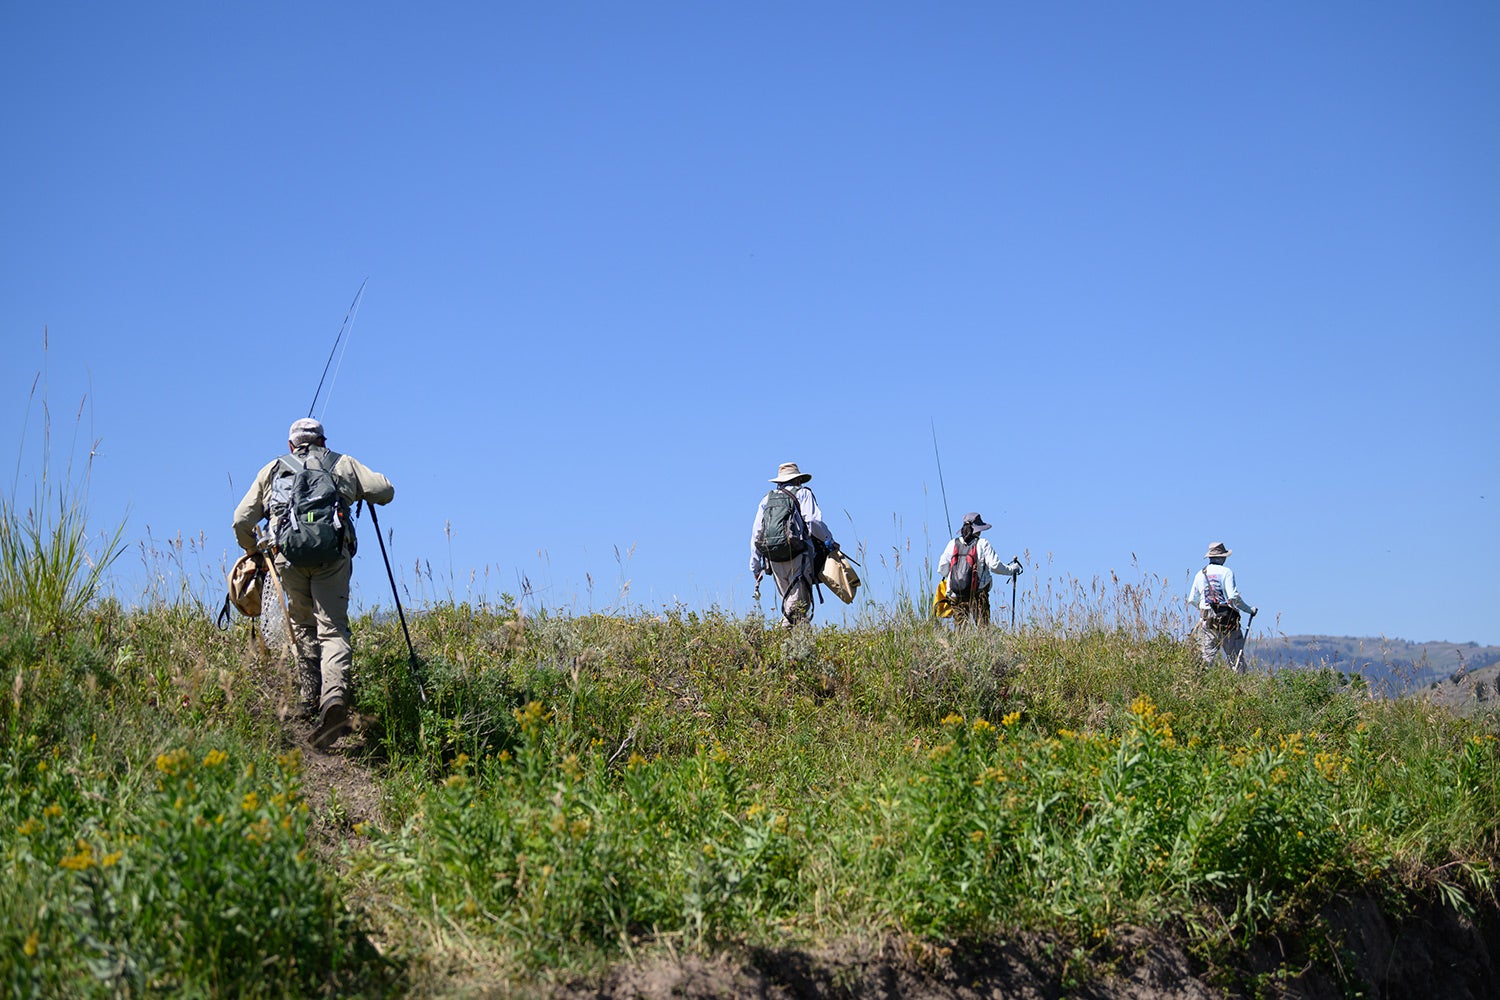 anglers hike through low vegetation in Yellowstone Park